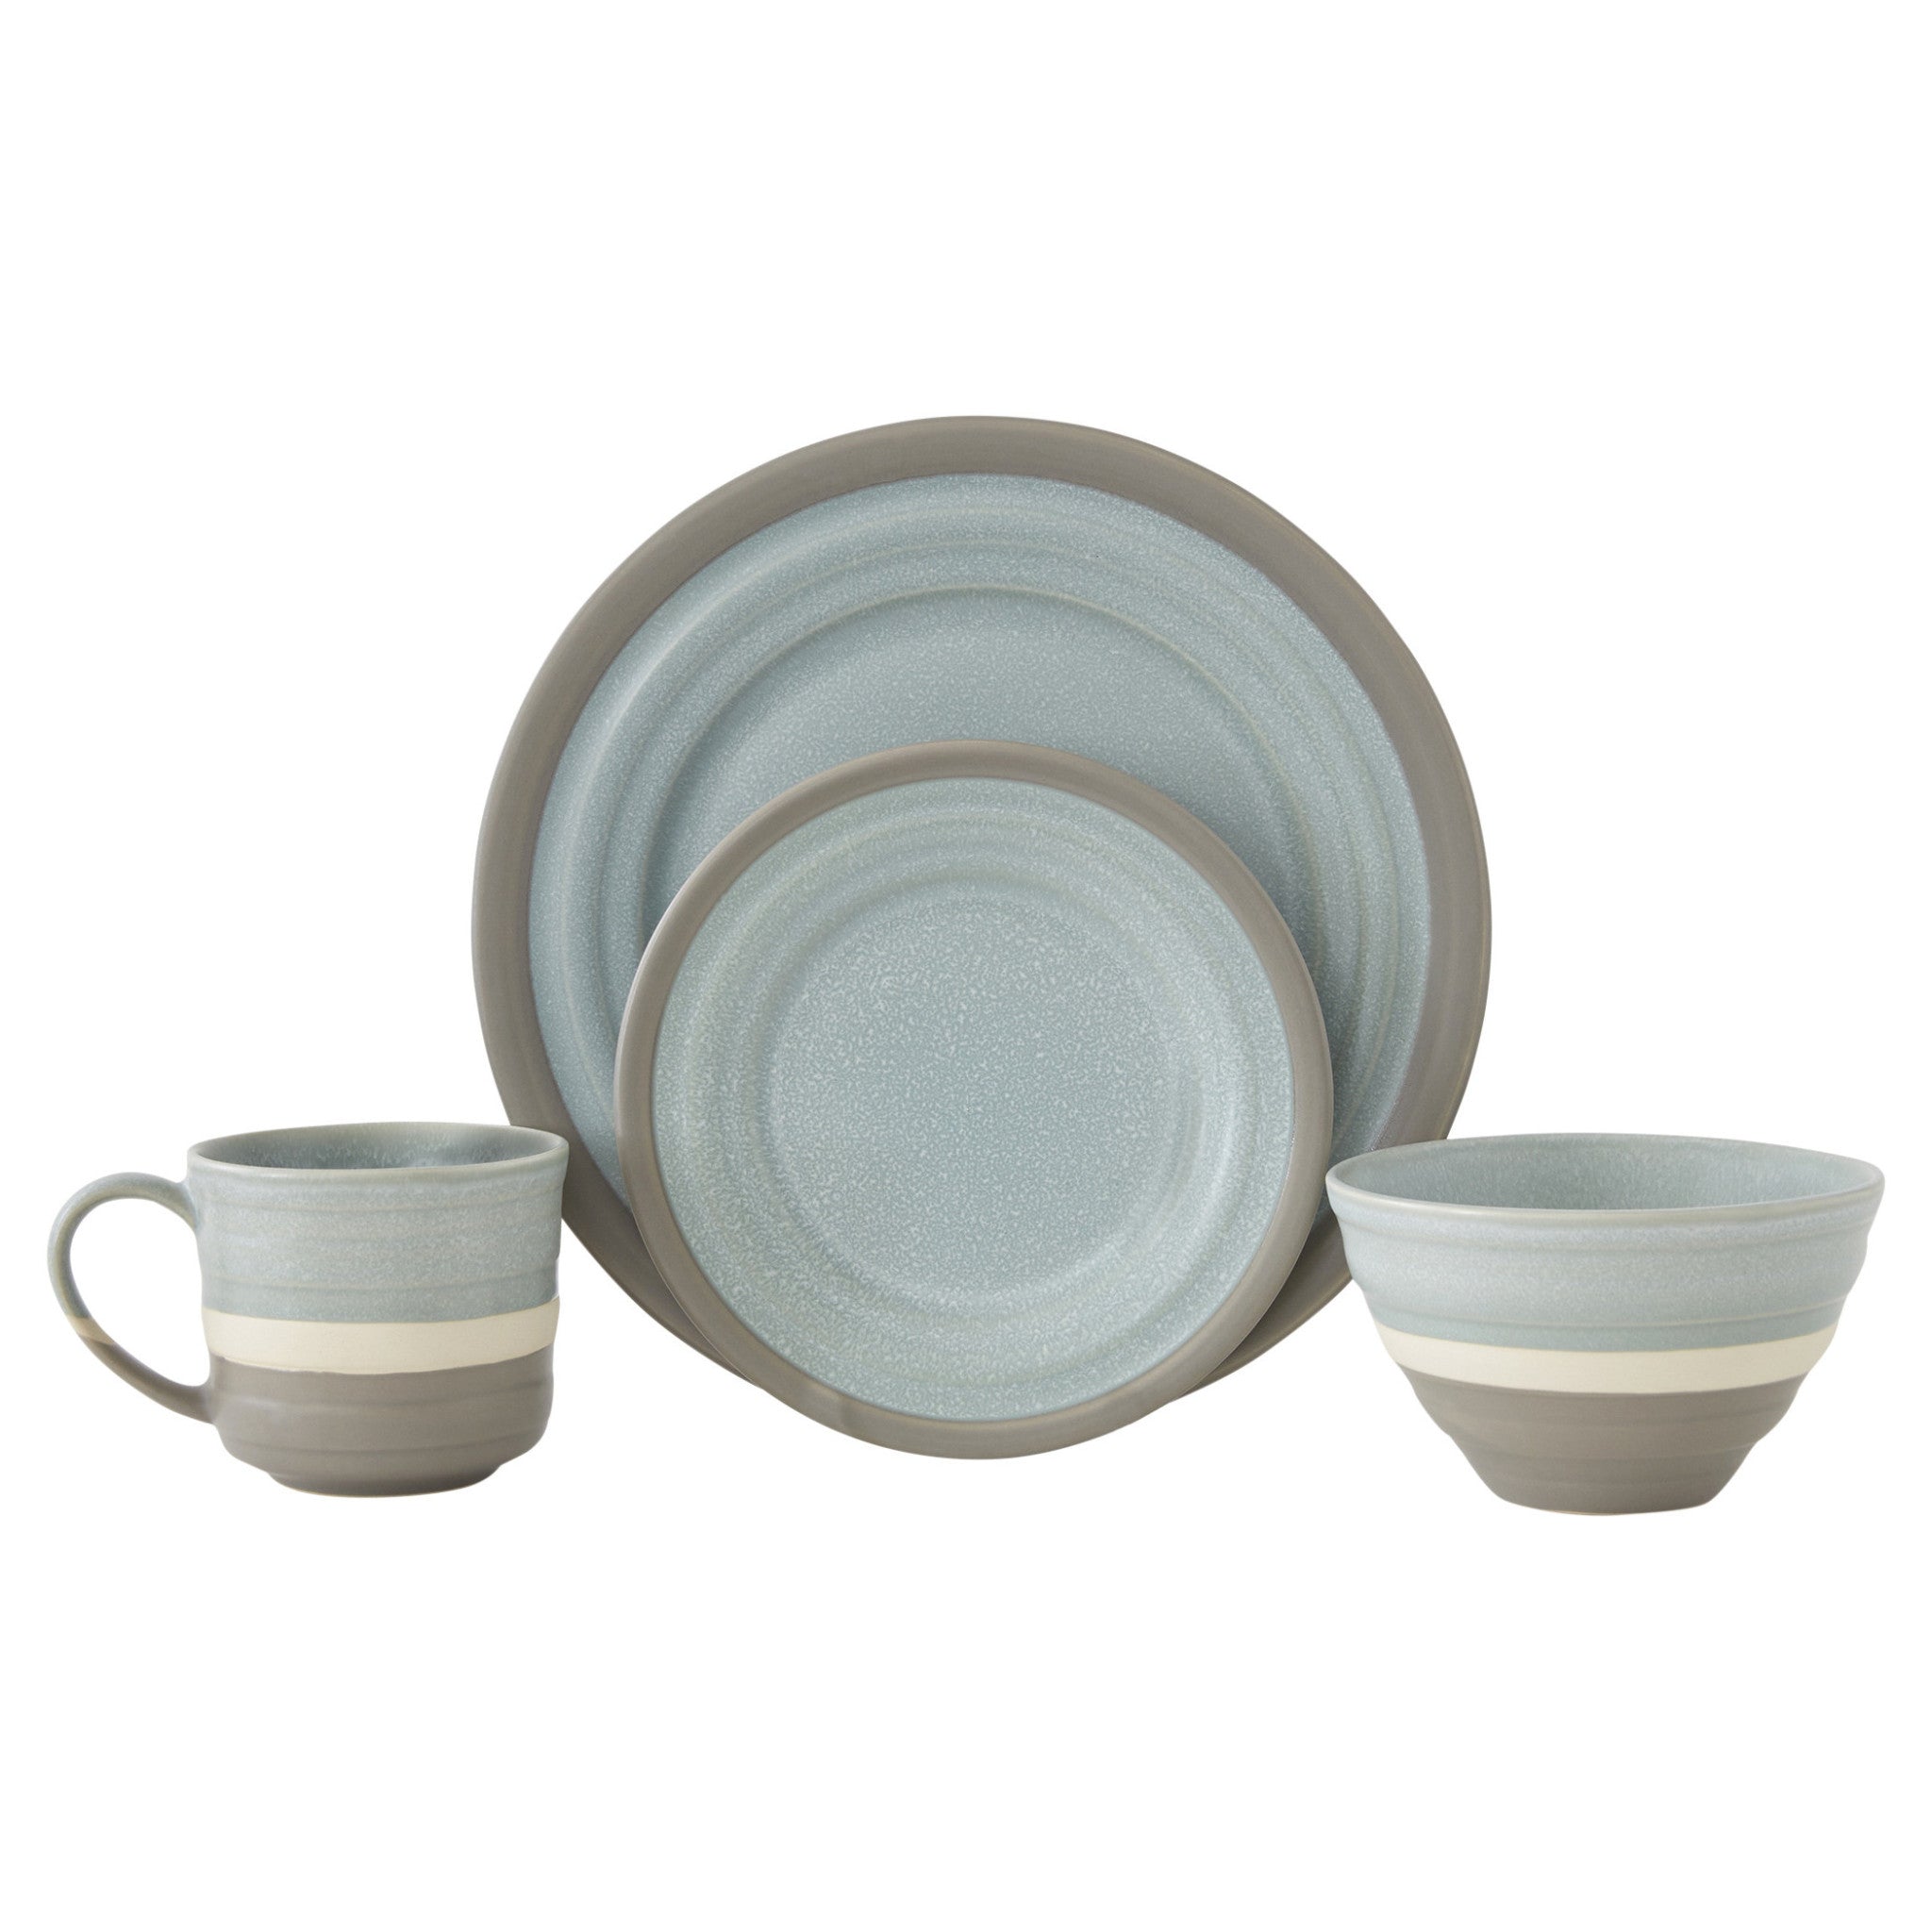 Blue and Gray Sixteen Piece Round Tone on Tone Ceramic Service For Four Dinnerware Set - Tuesday Morning-Dinnerware